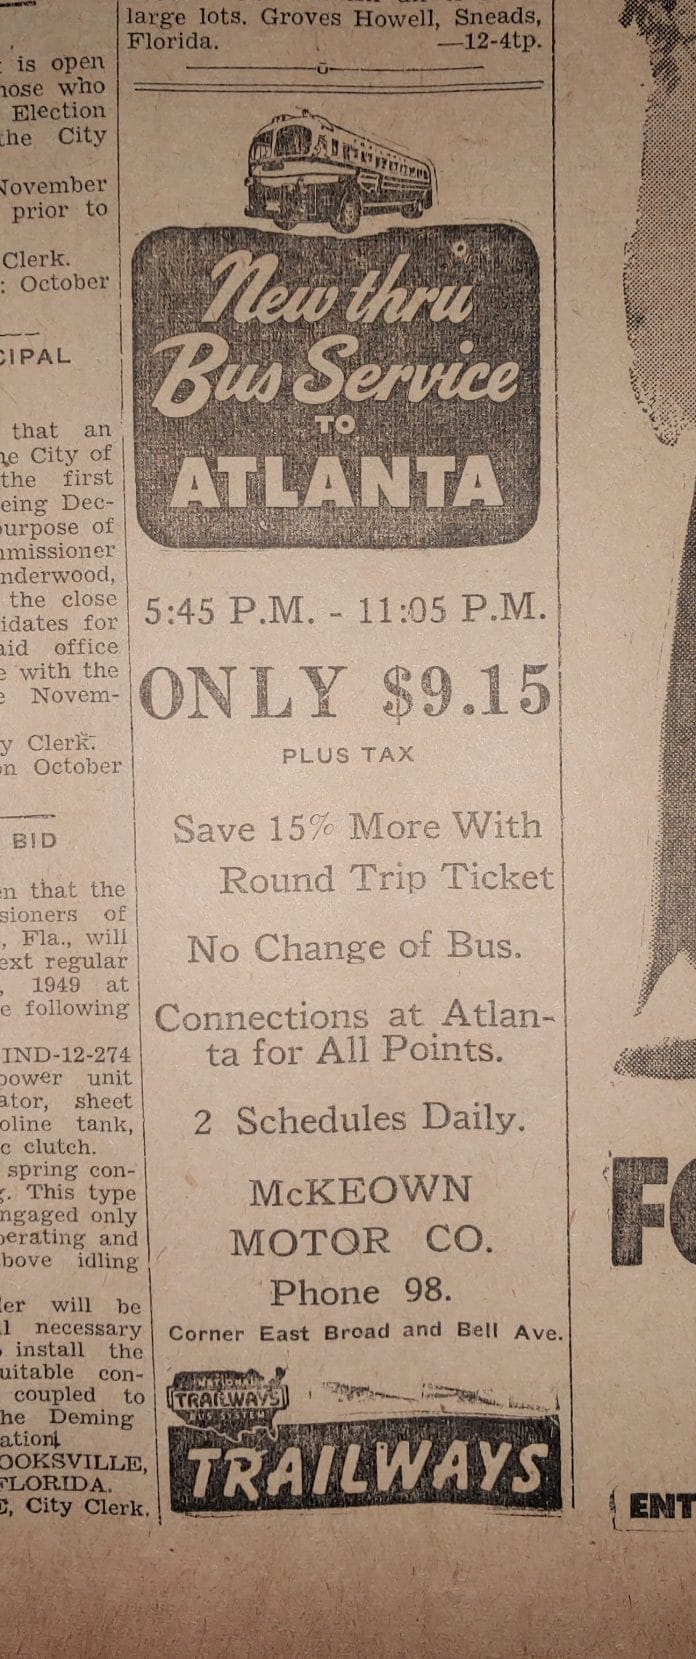 Advertisement from the October 21, 1949 issue of the Brooksville Sun.